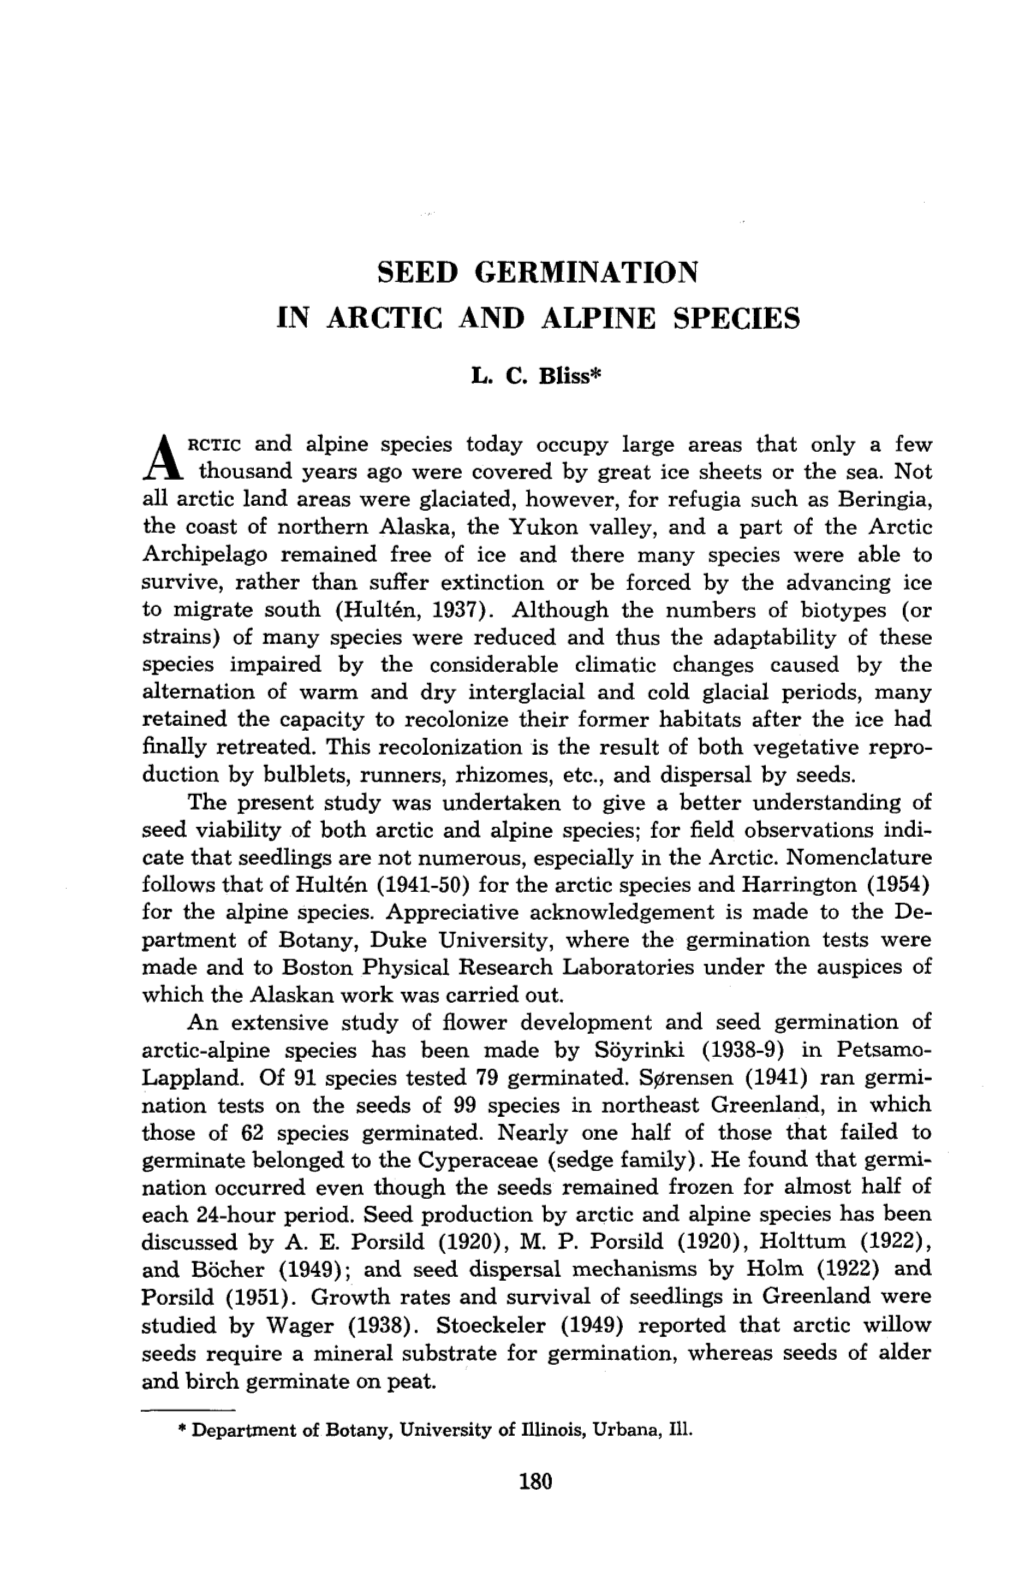 Seed Germination in Arctic and Alpine Species